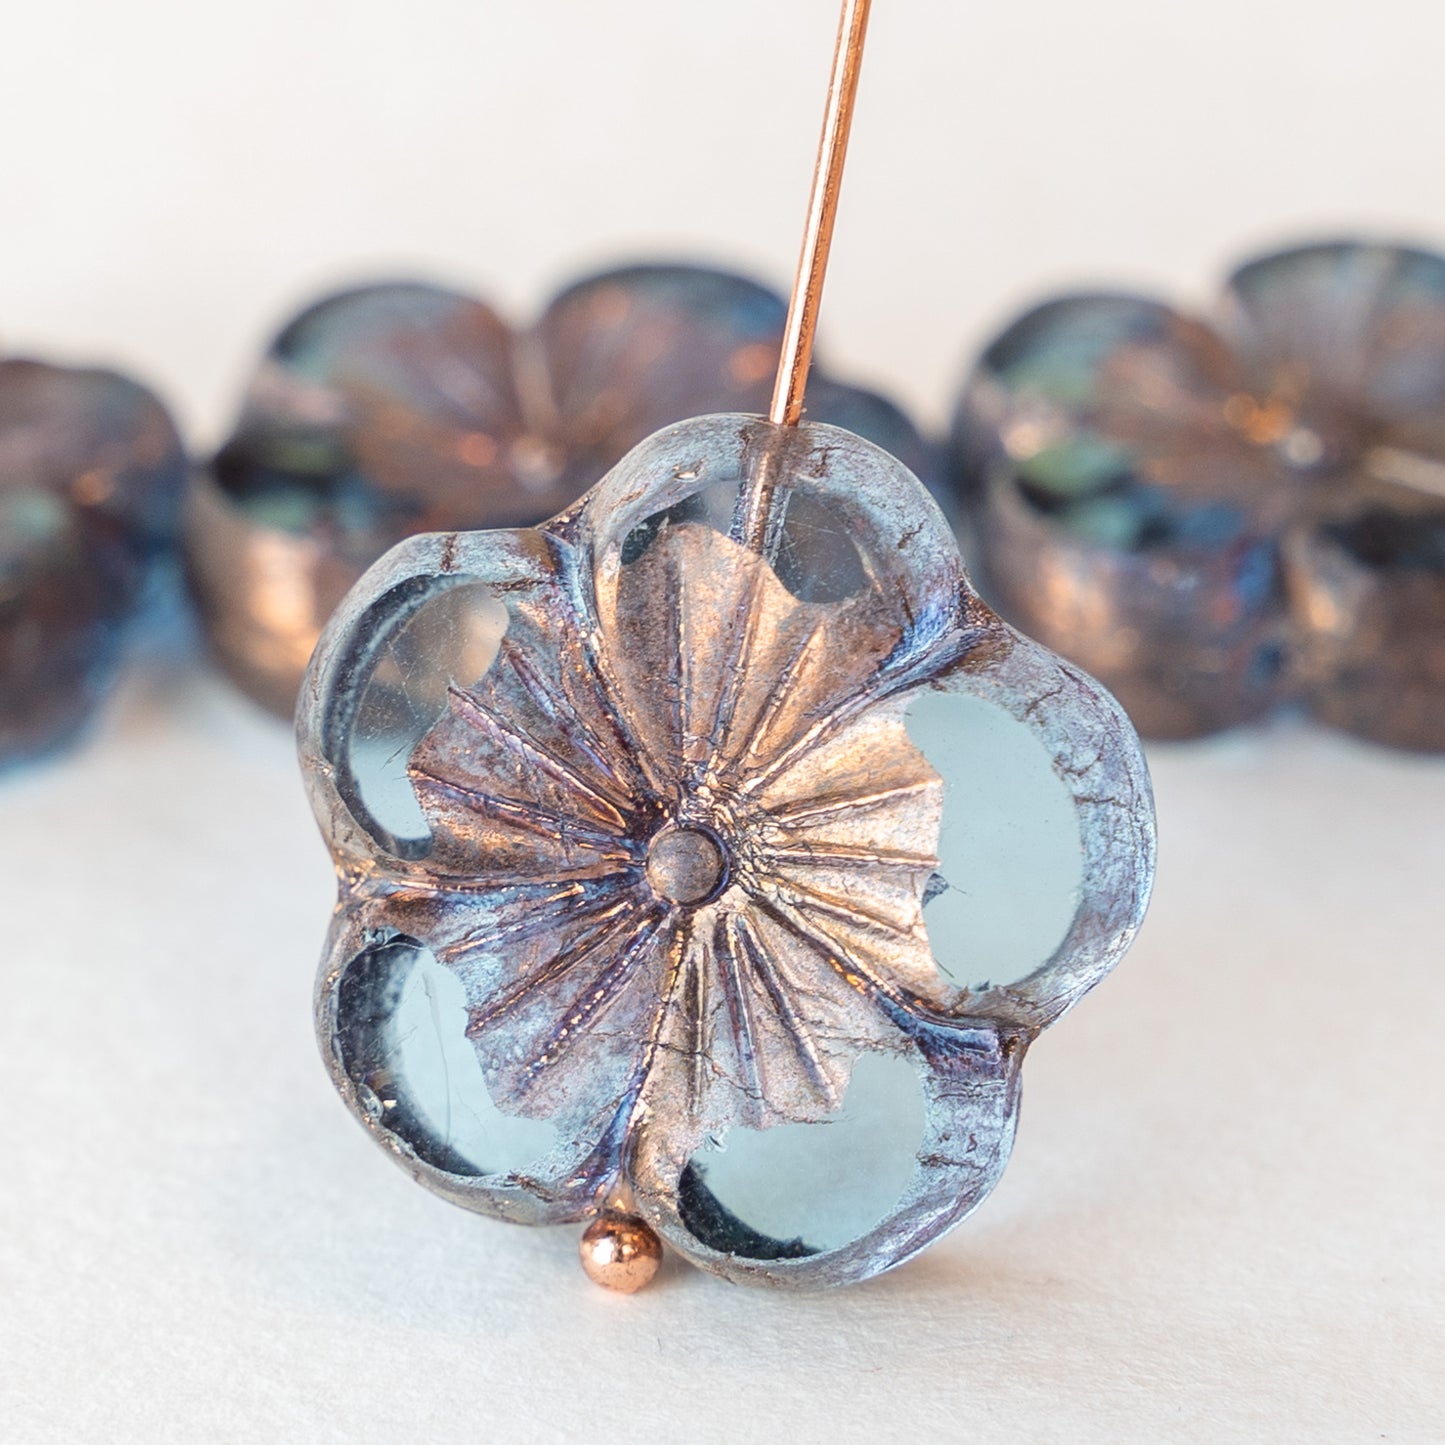 Hibiscus Flower Beads - Blue with Copper Wash - 2 or 6 beads